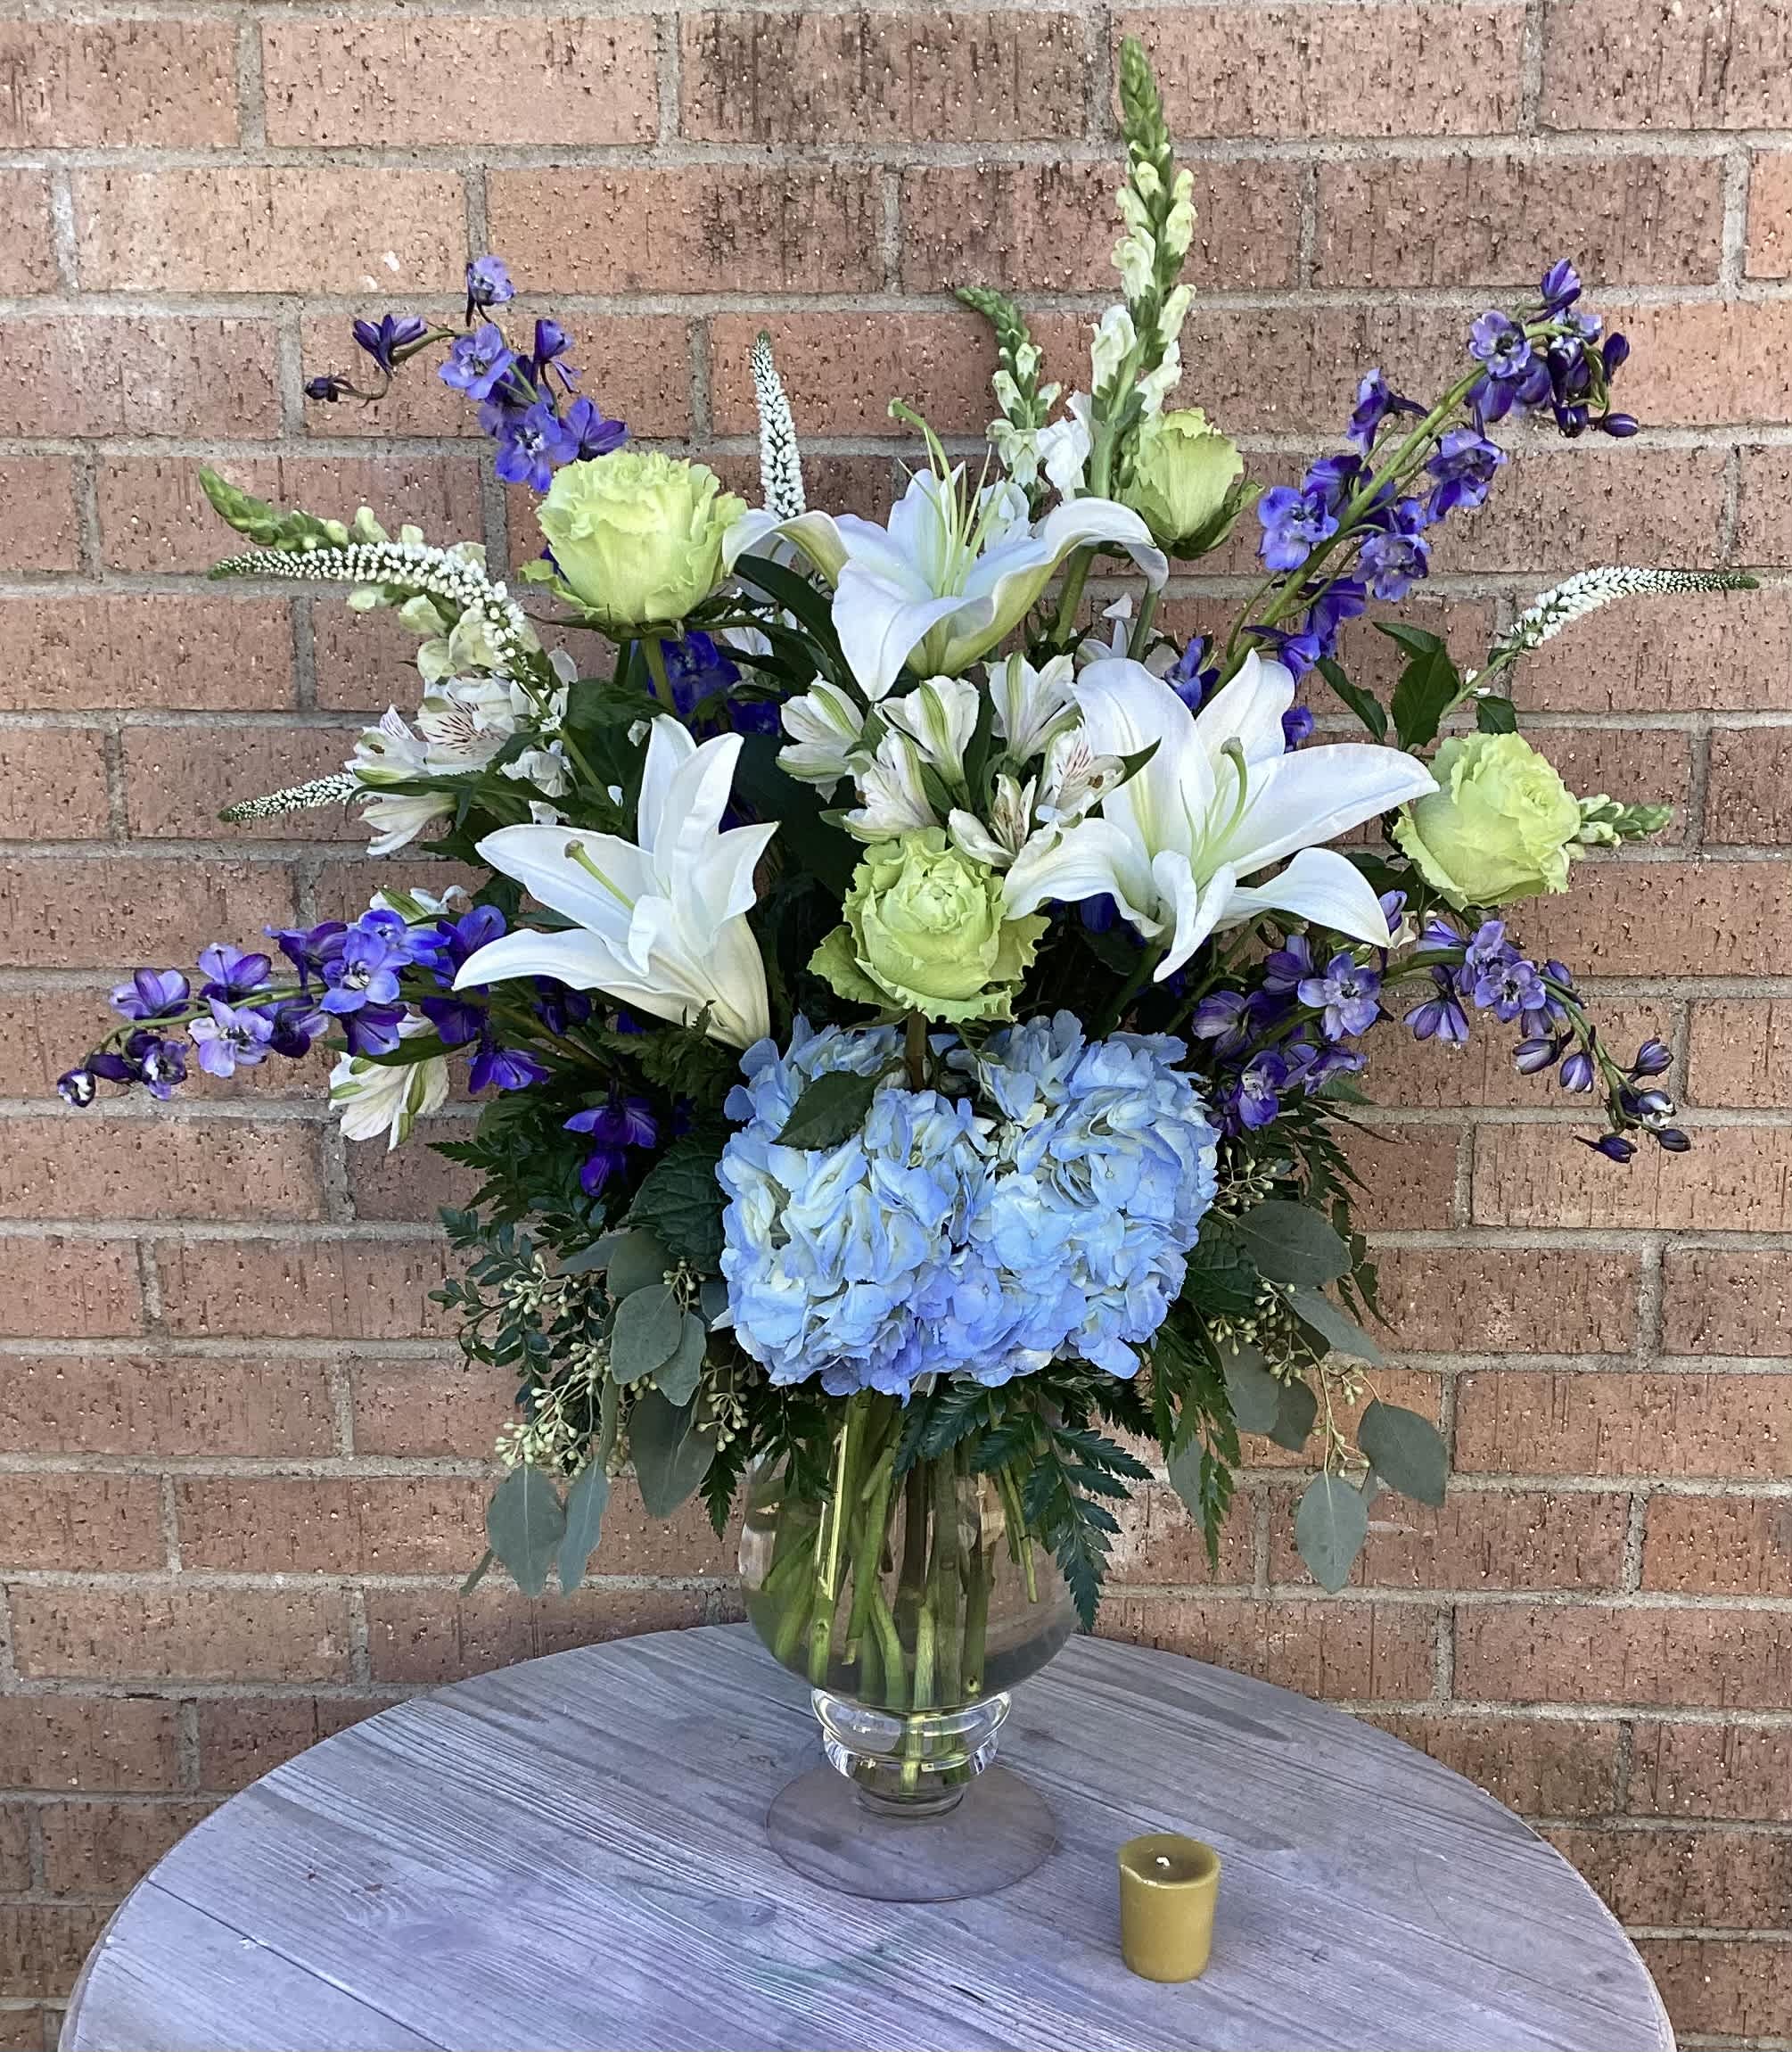 Whimsical Blooms - This arrangement brings fresh beauty and whimsical blue and white flowers to your special recipient. 